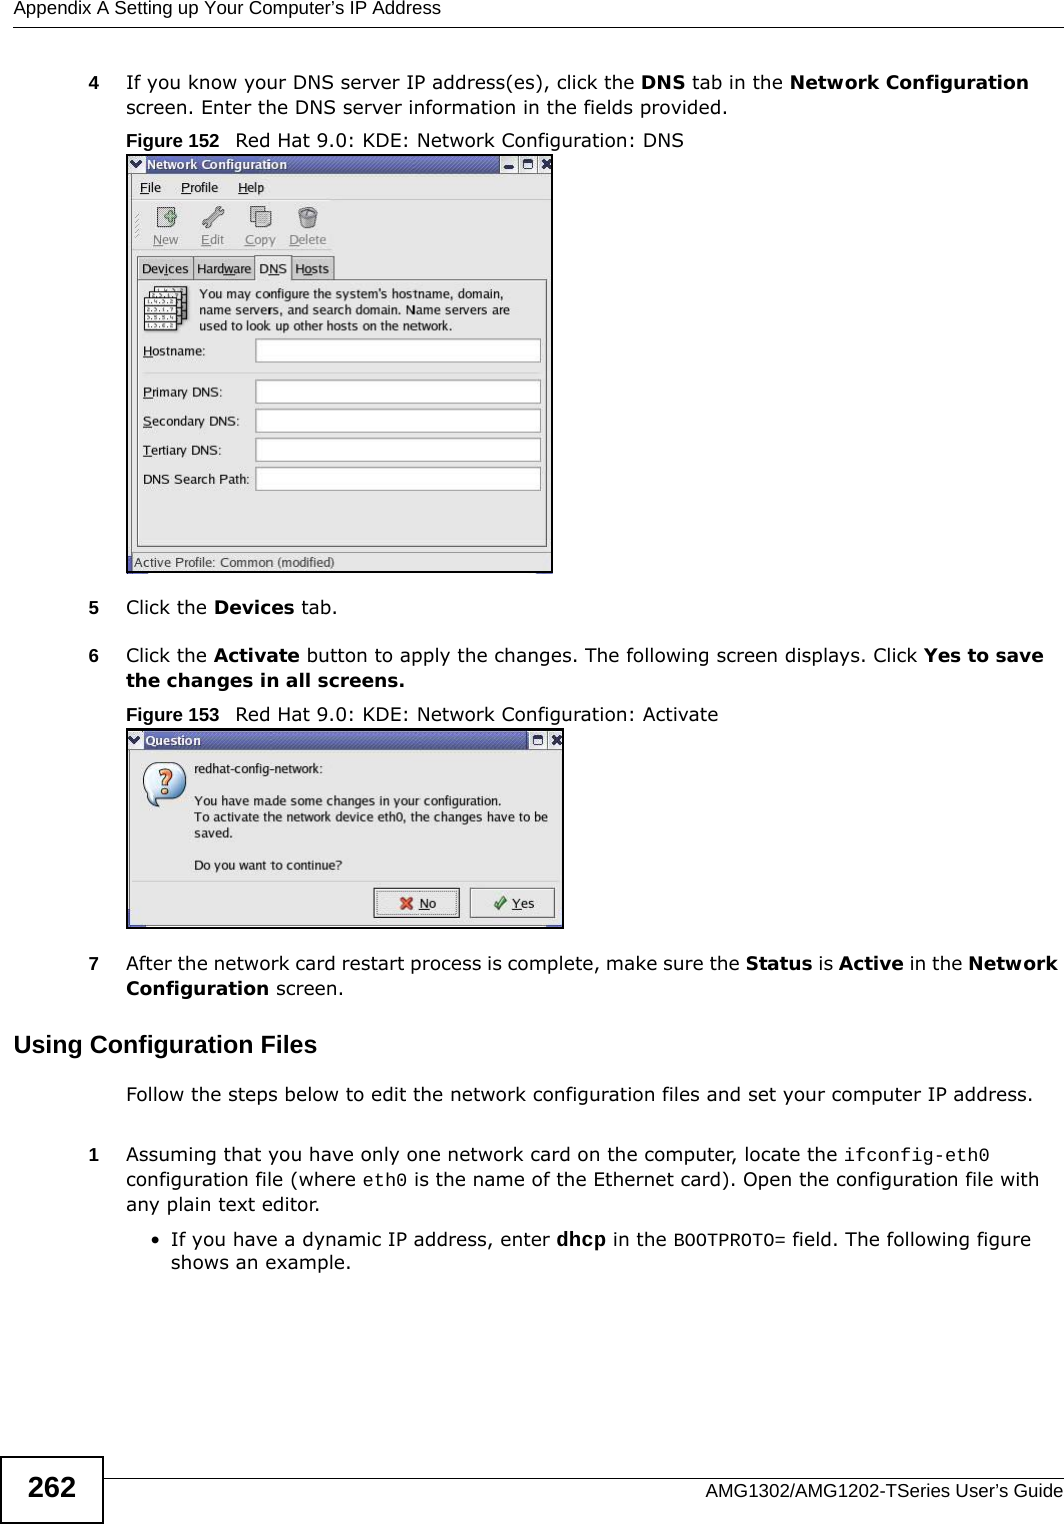 Appendix A Setting up Your Computer’s IP AddressAMG1302/AMG1202-TSeries User’s Guide2624If you know your DNS server IP address(es), click the DNS tab in the Network Configuration screen. Enter the DNS server information in the fields provided. Figure 152   Red Hat 9.0: KDE: Network Configuration: DNS 5Click the Devices tab. 6Click the Activate button to apply the changes. The following screen displays. Click Yes to save the changes in all screens.Figure 153   Red Hat 9.0: KDE: Network Configuration: Activate  7After the network card restart process is complete, make sure the Status is Active in the Network Configuration screen.Using Configuration FilesFollow the steps below to edit the network configuration files and set your computer IP address. 1Assuming that you have only one network card on the computer, locate the ifconfig-eth0 configuration file (where eth0 is the name of the Ethernet card). Open the configuration file with any plain text editor.• If you have a dynamic IP address, enter dhcp in the BOOTPROTO= field. The following figure shows an example. 